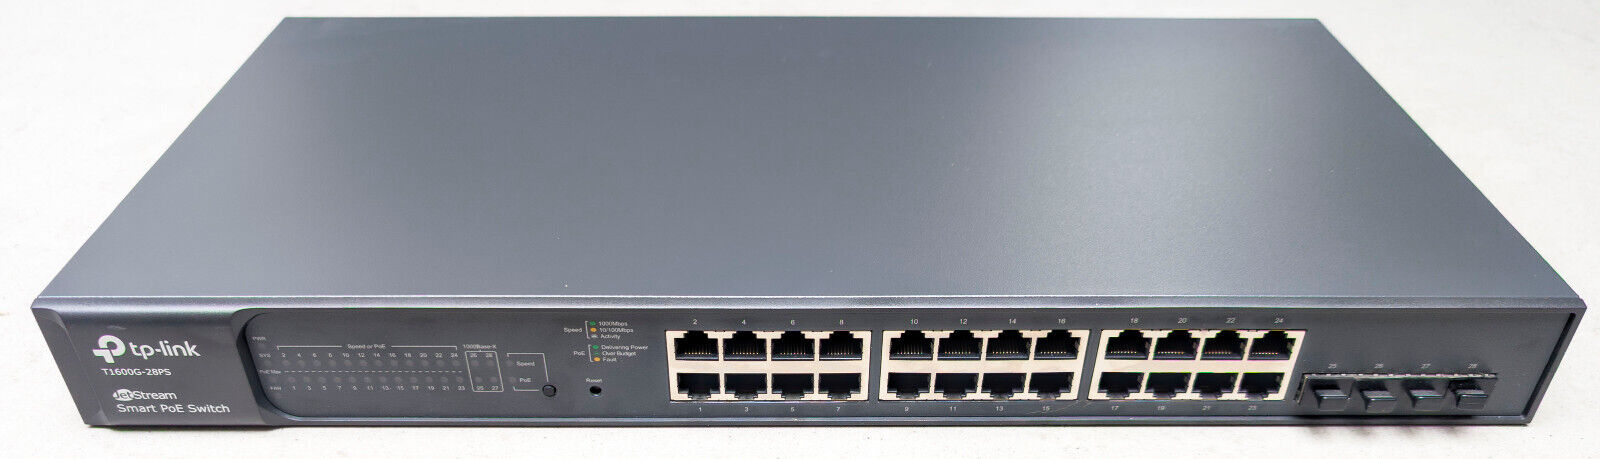 TP-Link T1600G-28PS Jetstream Smart PoE Switch TL-SG2424P with 4 SFP Ports